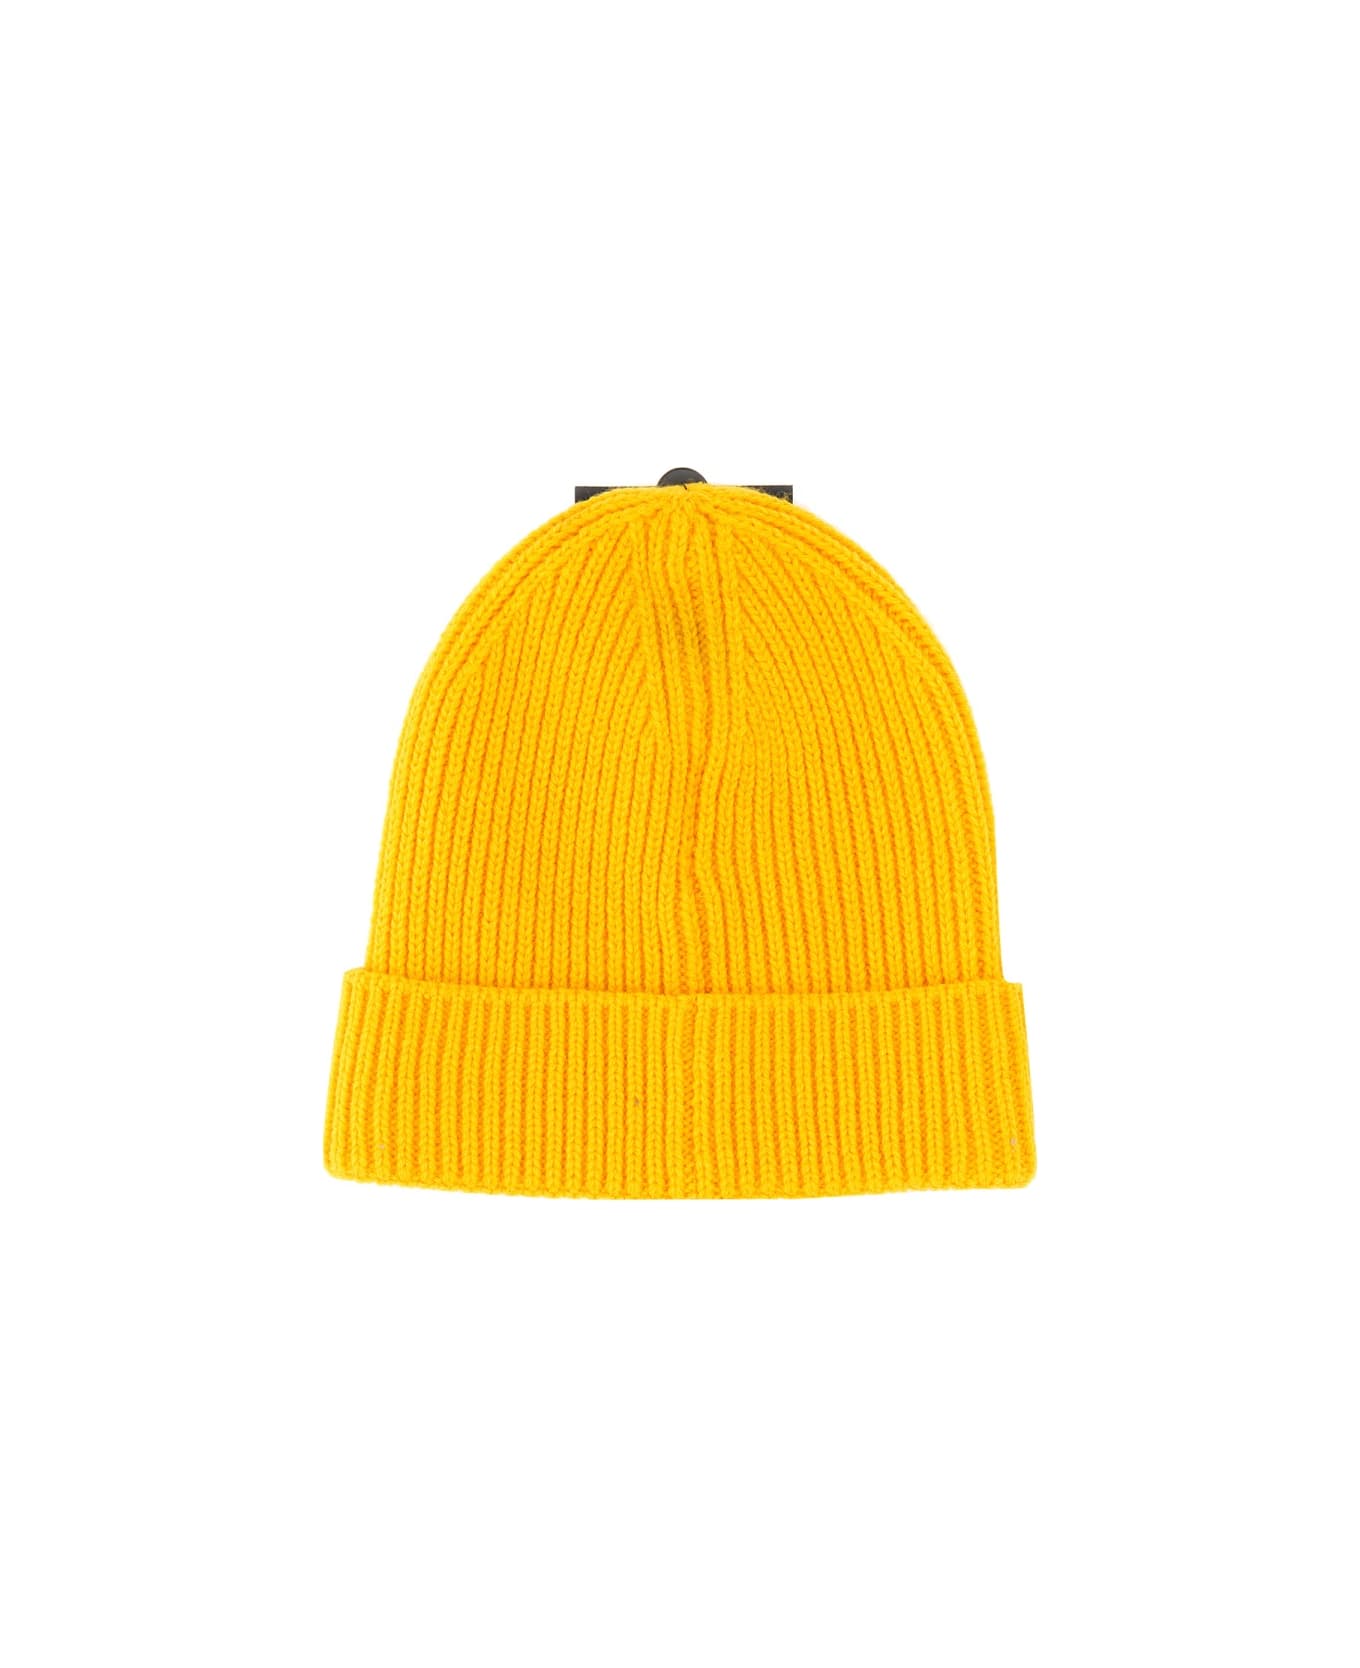 The North Face Beanie Hat - YELLOW 帽子